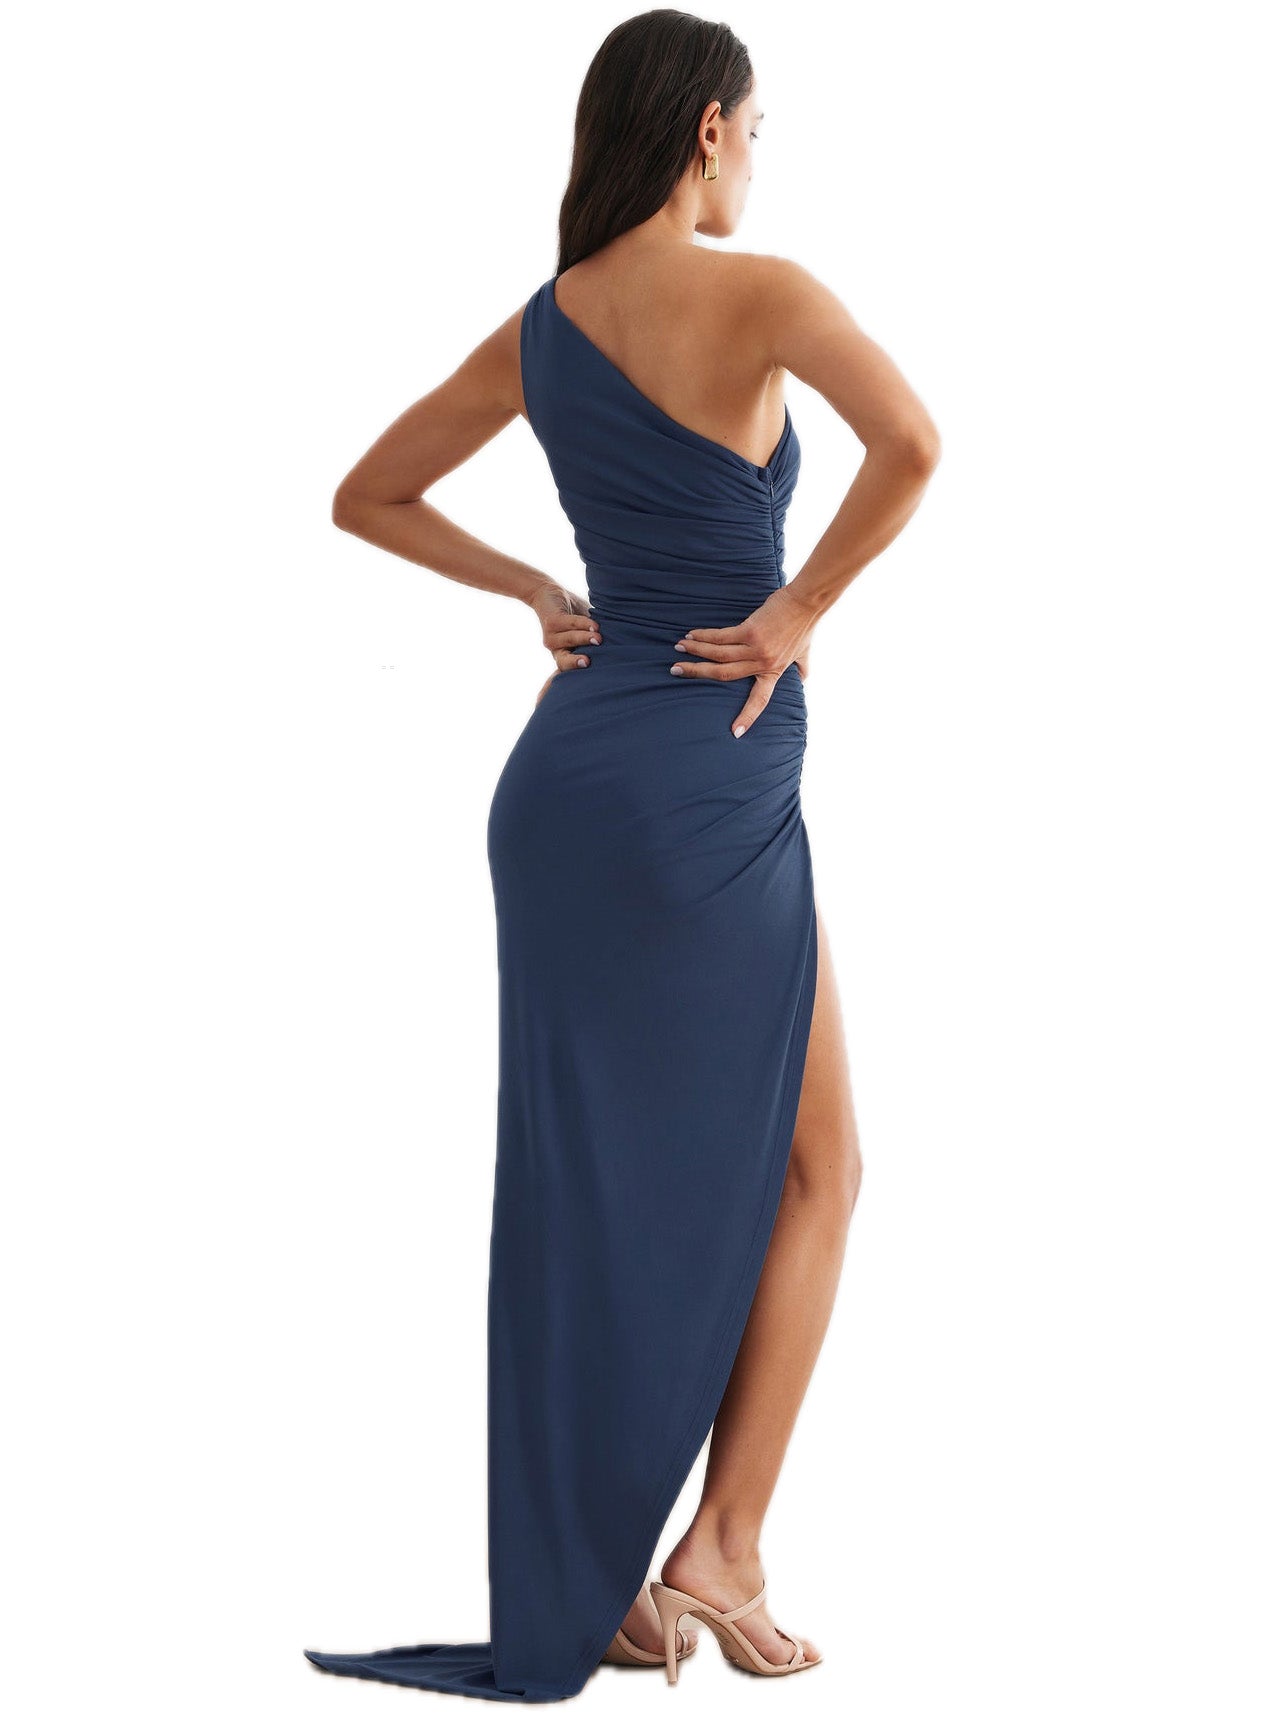 Ruched Surplice Mermaid One Shoulder Sleeveless Dress-GD102242